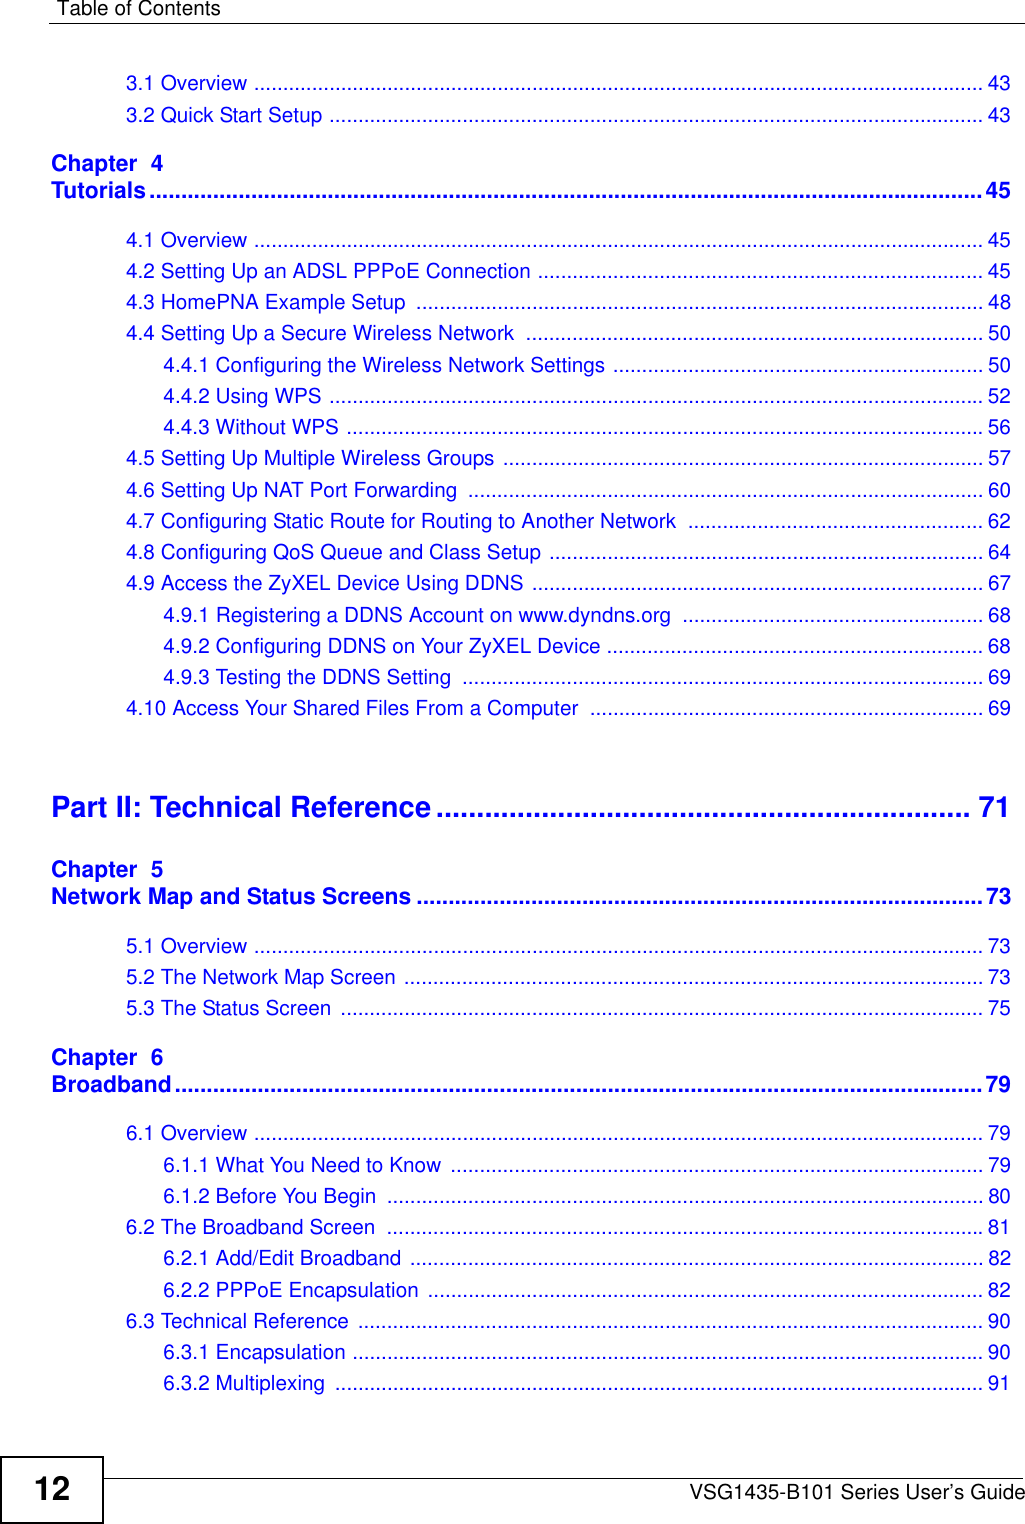 Table of ContentsVSG1435-B101 Series User’s Guide123.1 Overview .............................................................................................................................. 433.2 Quick Start Setup ................................................................................................................. 43Chapter  4Tutorials...................................................................................................................................454.1 Overview .............................................................................................................................. 454.2 Setting Up an ADSL PPPoE Connection ............................................................................. 454.3 HomePNA Example Setup  .................................................................................................. 484.4 Setting Up a Secure Wireless Network  ............................................................................... 504.4.1 Configuring the Wireless Network Settings ................................................................ 504.4.2 Using WPS ................................................................................................................. 524.4.3 Without WPS ..............................................................................................................564.5 Setting Up Multiple Wireless Groups ................................................................................... 574.6 Setting Up NAT Port Forwarding  ......................................................................................... 604.7 Configuring Static Route for Routing to Another Network  ................................................... 624.8 Configuring QoS Queue and Class Setup ........................................................................... 644.9 Access the ZyXEL Device Using DDNS .............................................................................. 674.9.1 Registering a DDNS Account on www.dyndns.org .................................................... 684.9.2 Configuring DDNS on Your ZyXEL Device ................................................................. 684.9.3 Testing the DDNS Setting  .......................................................................................... 694.10 Access Your Shared Files From a Computer .................................................................... 69Part II: Technical Reference.................................................................. 71Chapter  5Network Map and Status Screens .........................................................................................735.1 Overview .............................................................................................................................. 735.2 The Network Map Screen .................................................................................................... 735.3 The Status Screen ............................................................................................................... 75Chapter  6Broadband...............................................................................................................................796.1 Overview .............................................................................................................................. 796.1.1 What You Need to Know  ............................................................................................ 796.1.2 Before You Begin  ....................................................................................................... 806.2 The Broadband Screen  .......................................................................................................816.2.1 Add/Edit Broadband ................................................................................................... 826.2.2 PPPoE Encapsulation ................................................................................................ 826.3 Technical Reference  ............................................................................................................ 906.3.1 Encapsulation ............................................................................................................. 906.3.2 Multiplexing  ................................................................................................................ 91